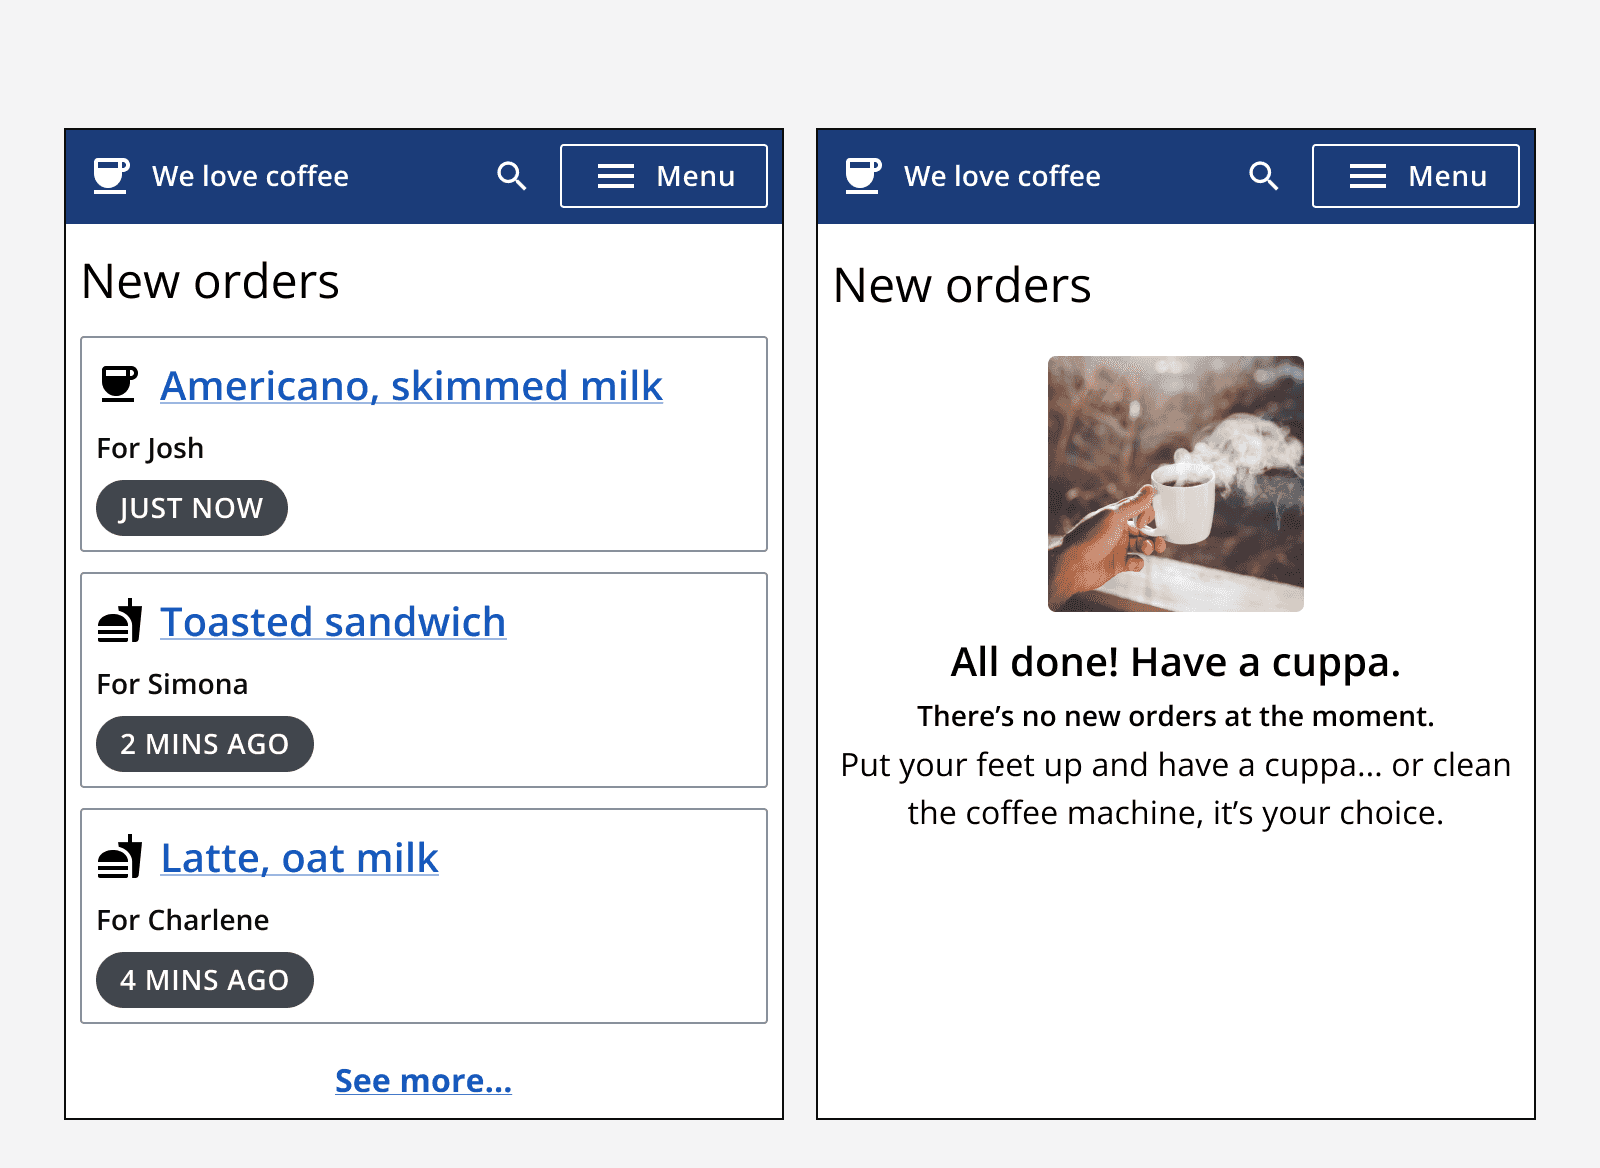 An example app that shows new orders for coffee that need to be fulfilled. After the orders have been completed, an empty state component is displayed showing a positive message that reads ‘All done! Have a cuppa’.